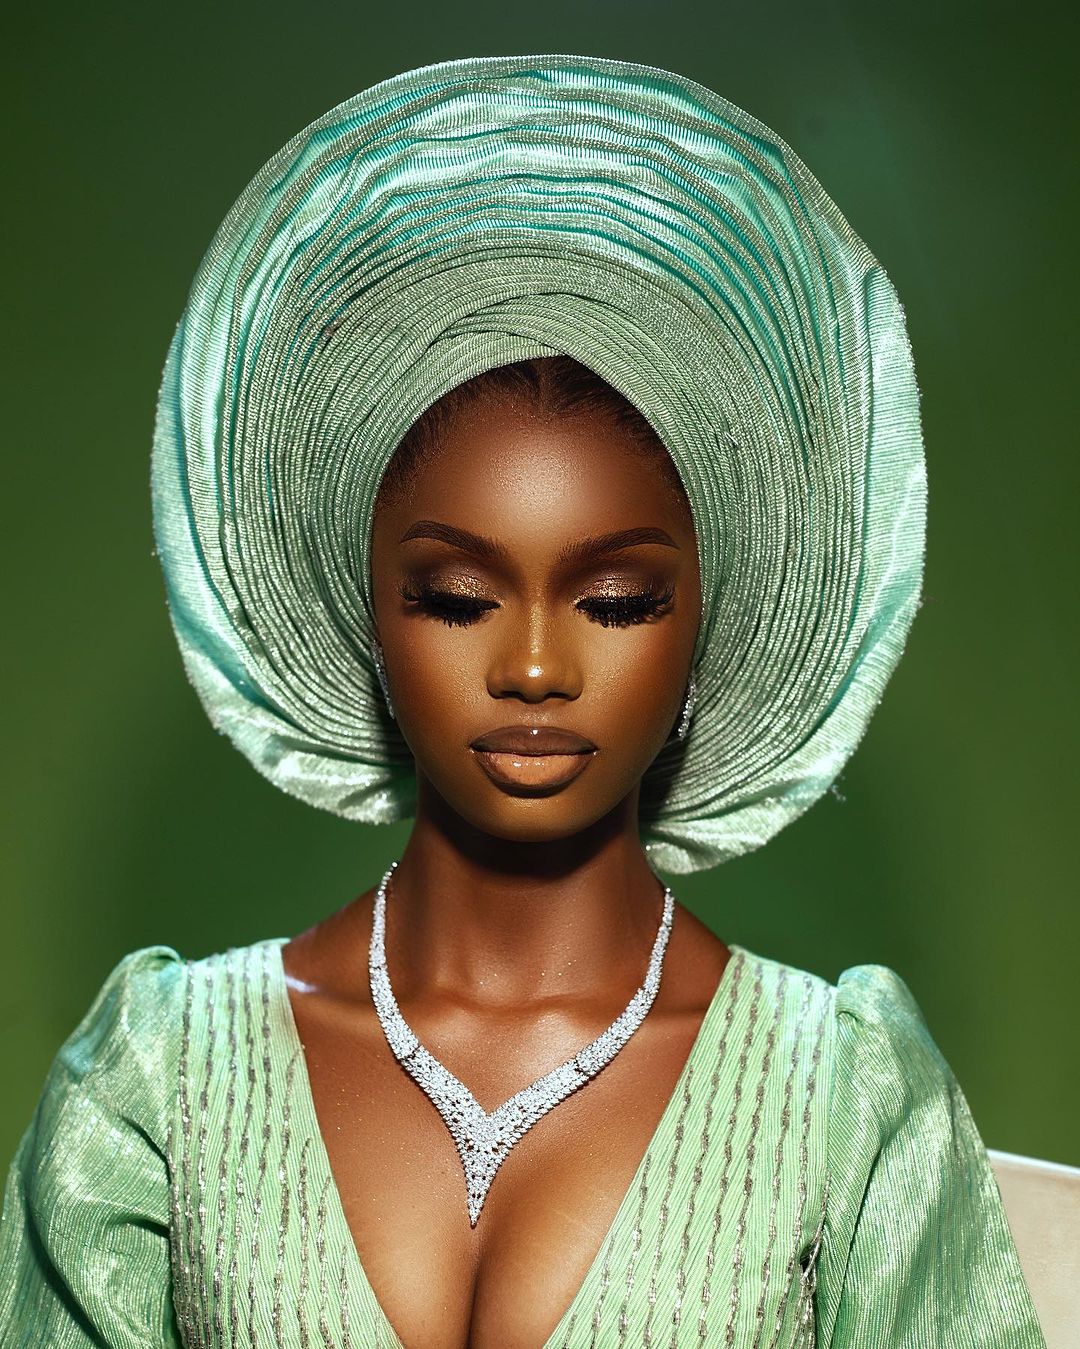 Make a Statement on Your Yoruba Trad With This Chic Beauty Look!